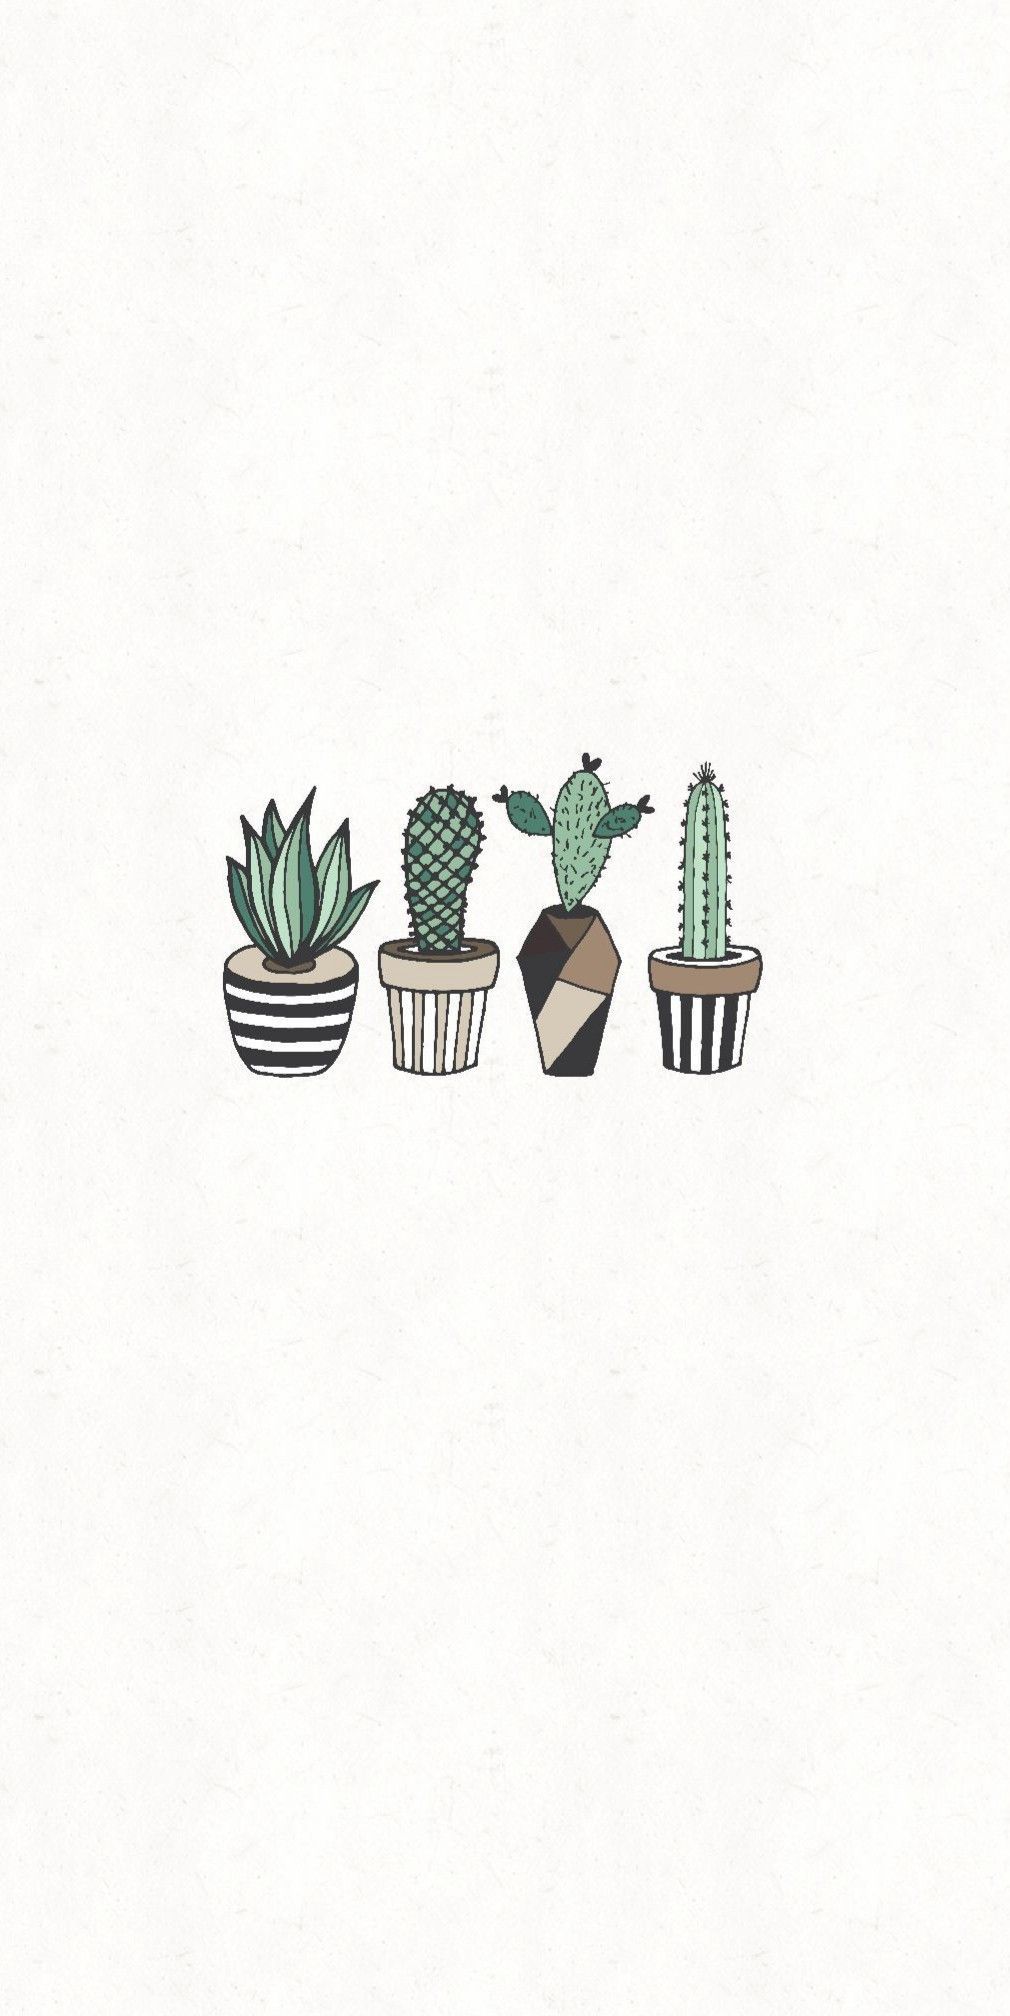 pngtree on Twitter Find more cute cactus wallpaper  httpstcoP3mgHIgXPT httpstcoTepAjwYs7n  Twitter